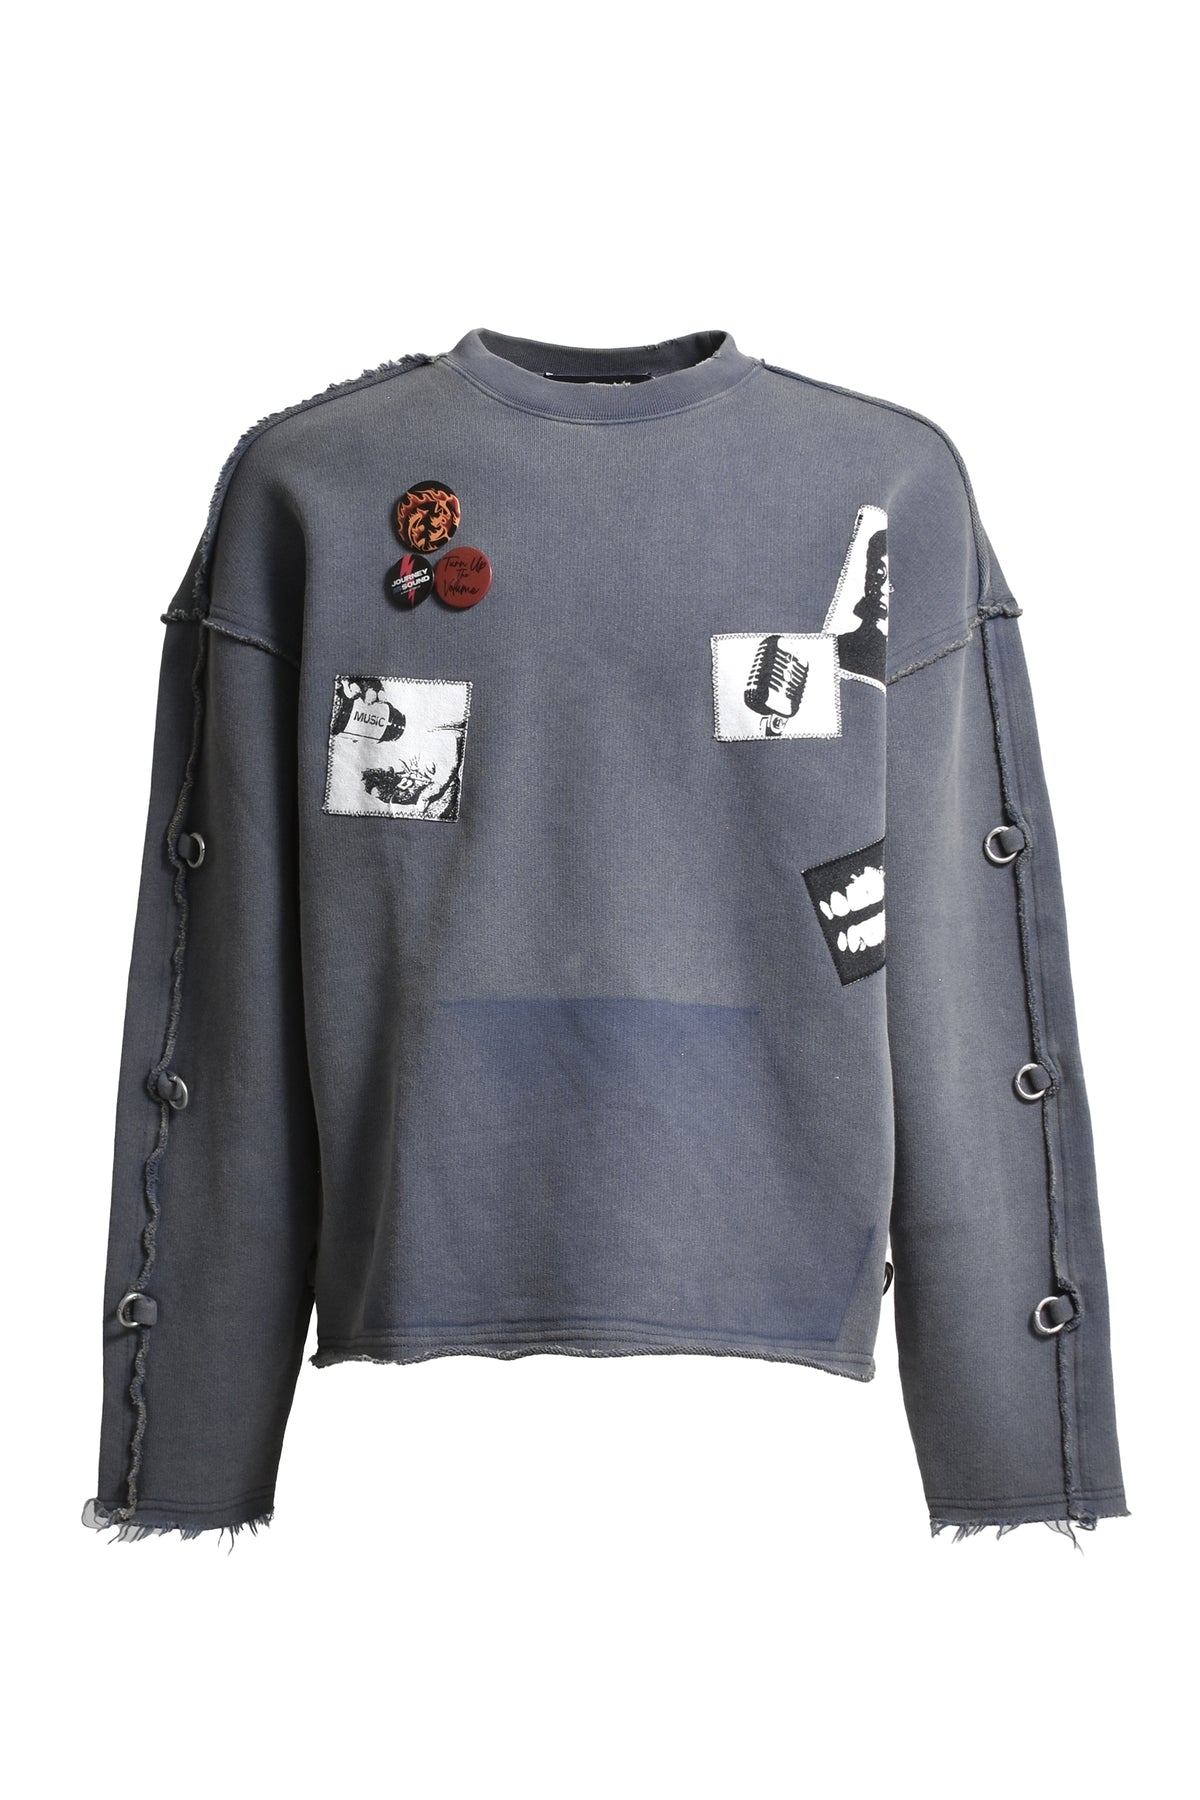 GRUNGE GRAPHIC BURN OUT CREWNECK / GRY